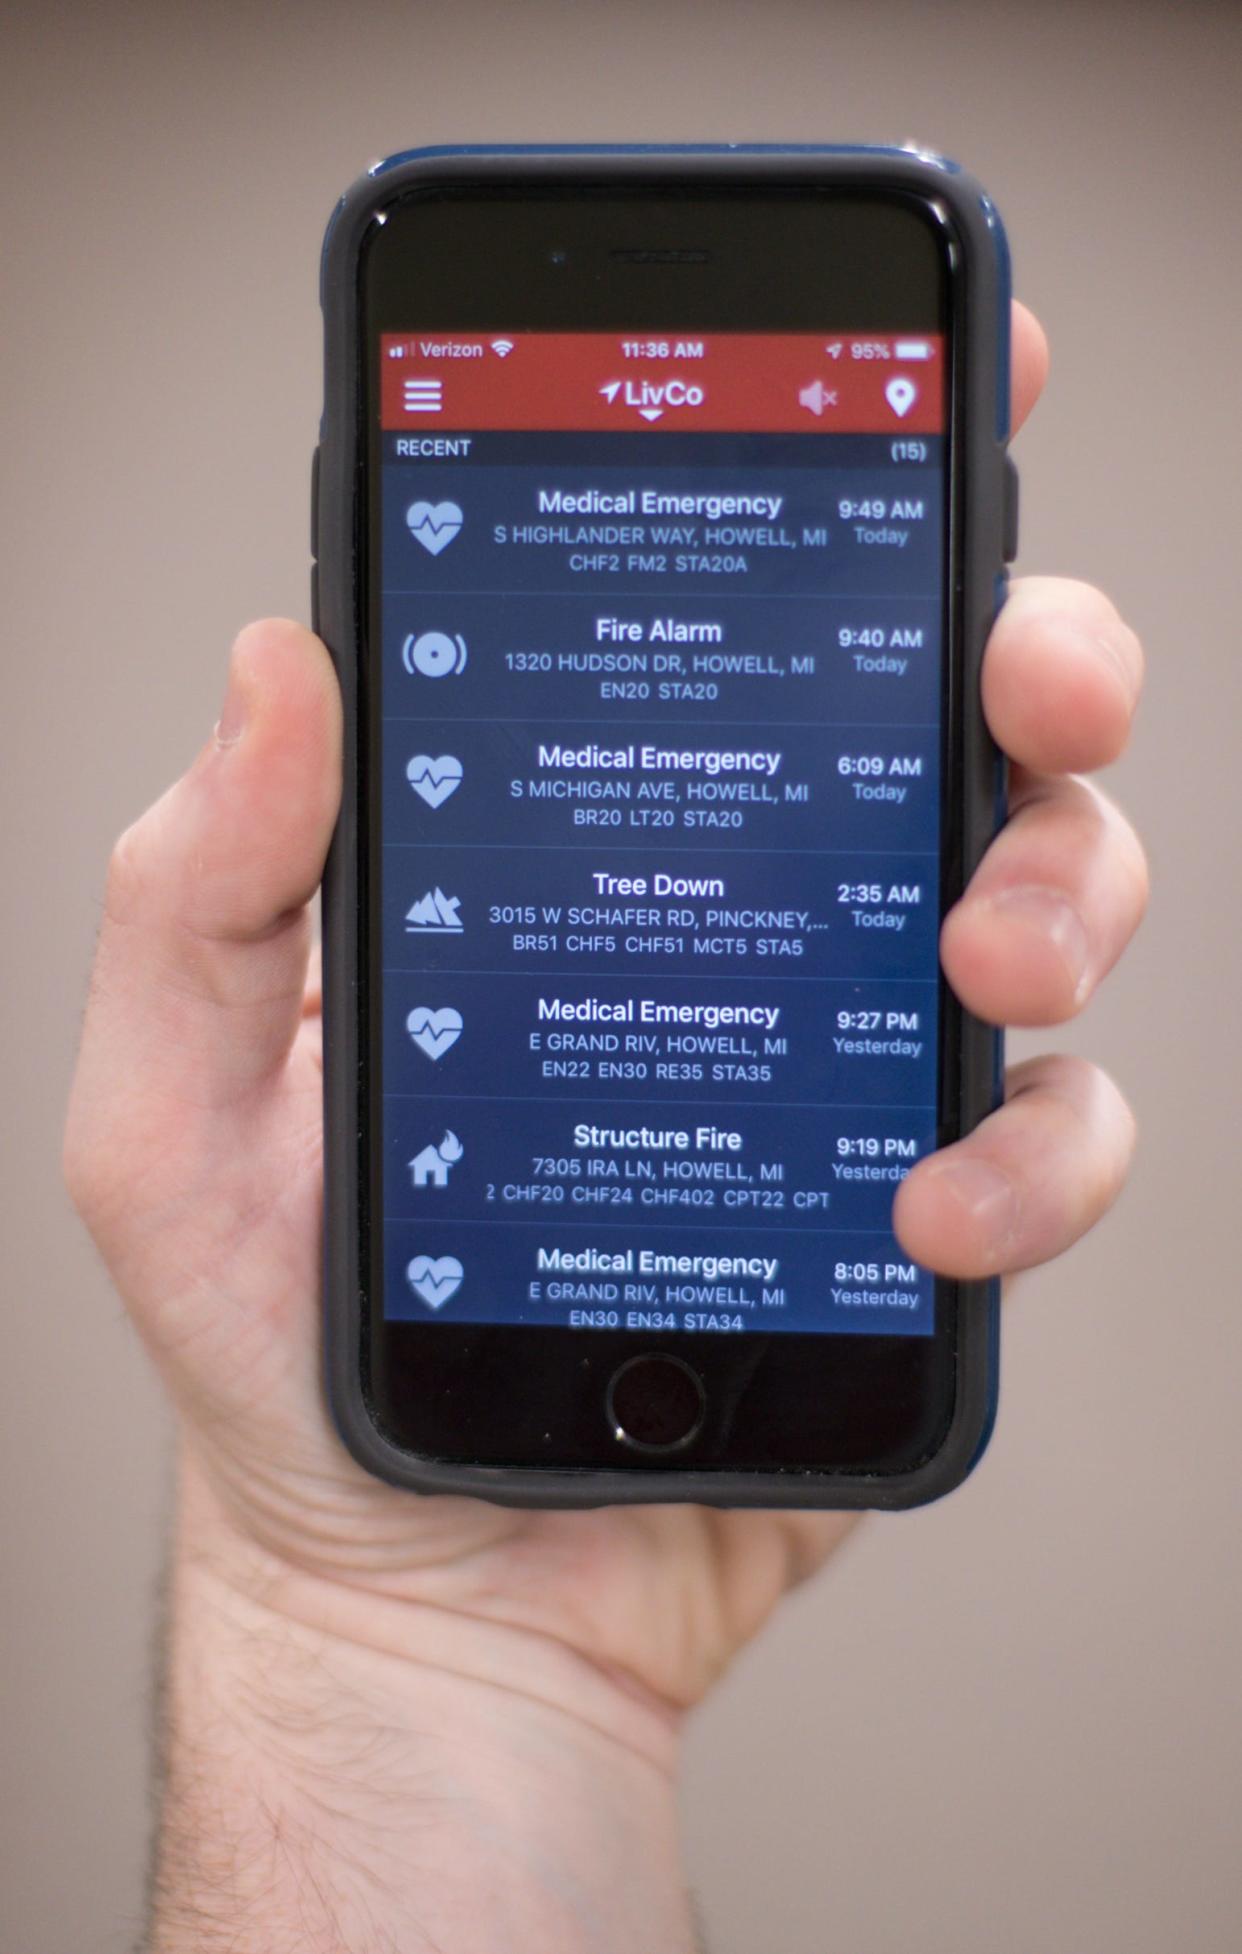 PulsePoint apps facilitate the administration of CPR, alert CPR-trained citizens and defibrillator locations as well as giving information about local fires, crashes and medical emergencies.